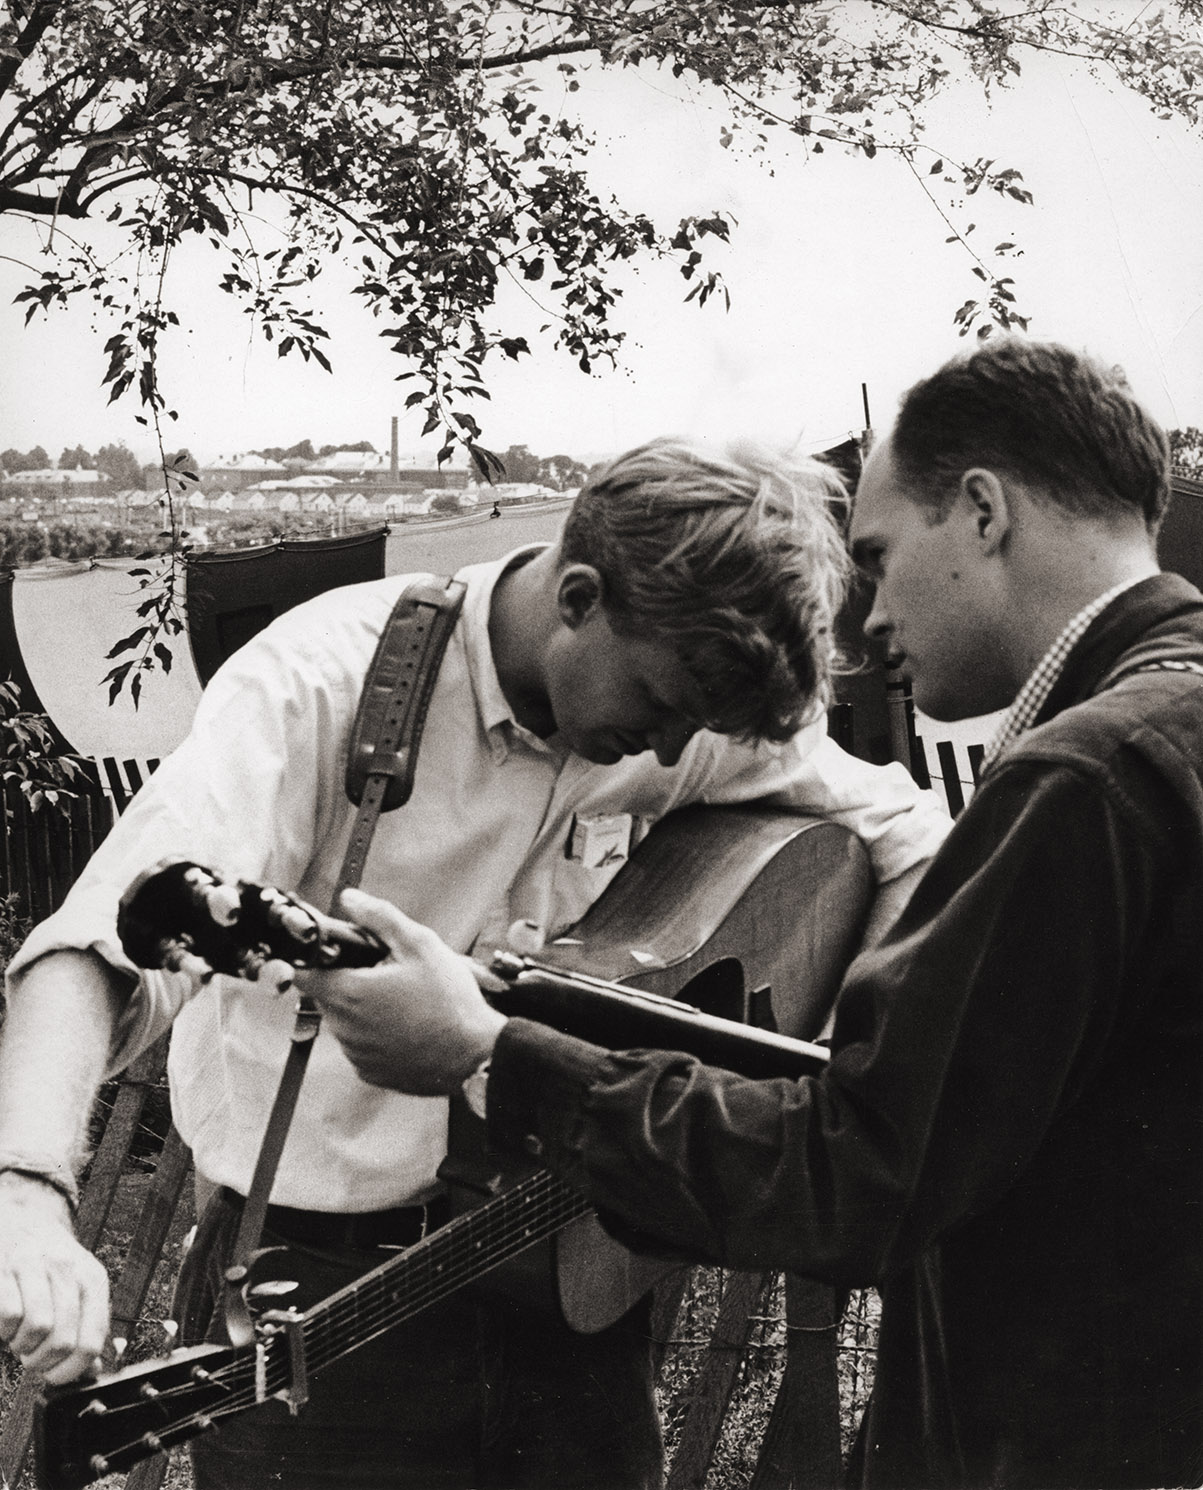 Depiction of Bill Keith (r.) and Jim Rooney at the Newport Folk Festival, 1965